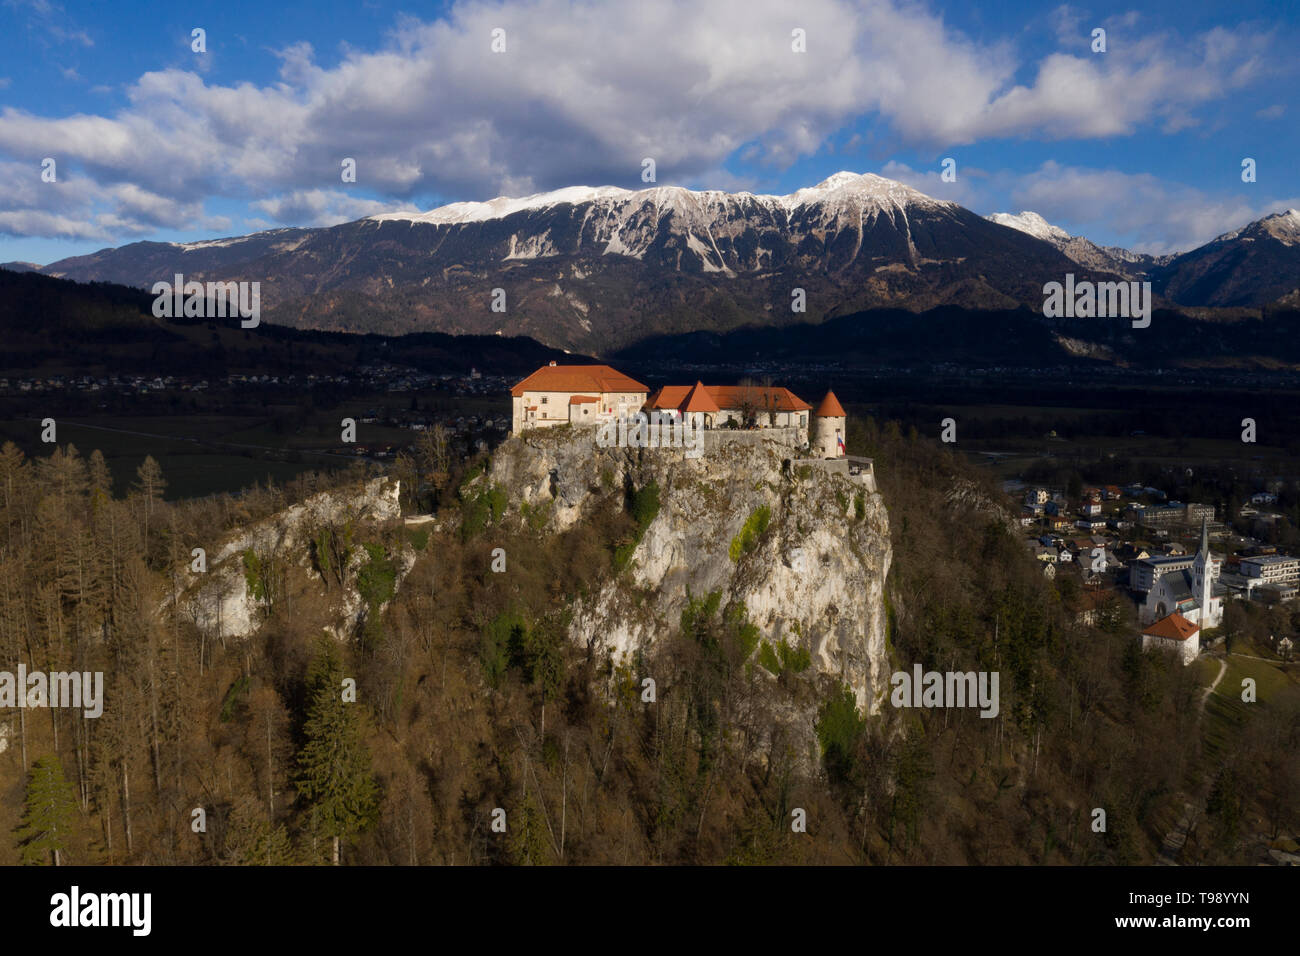 Castle of Bled, Bled, Slovenia Stock Photo